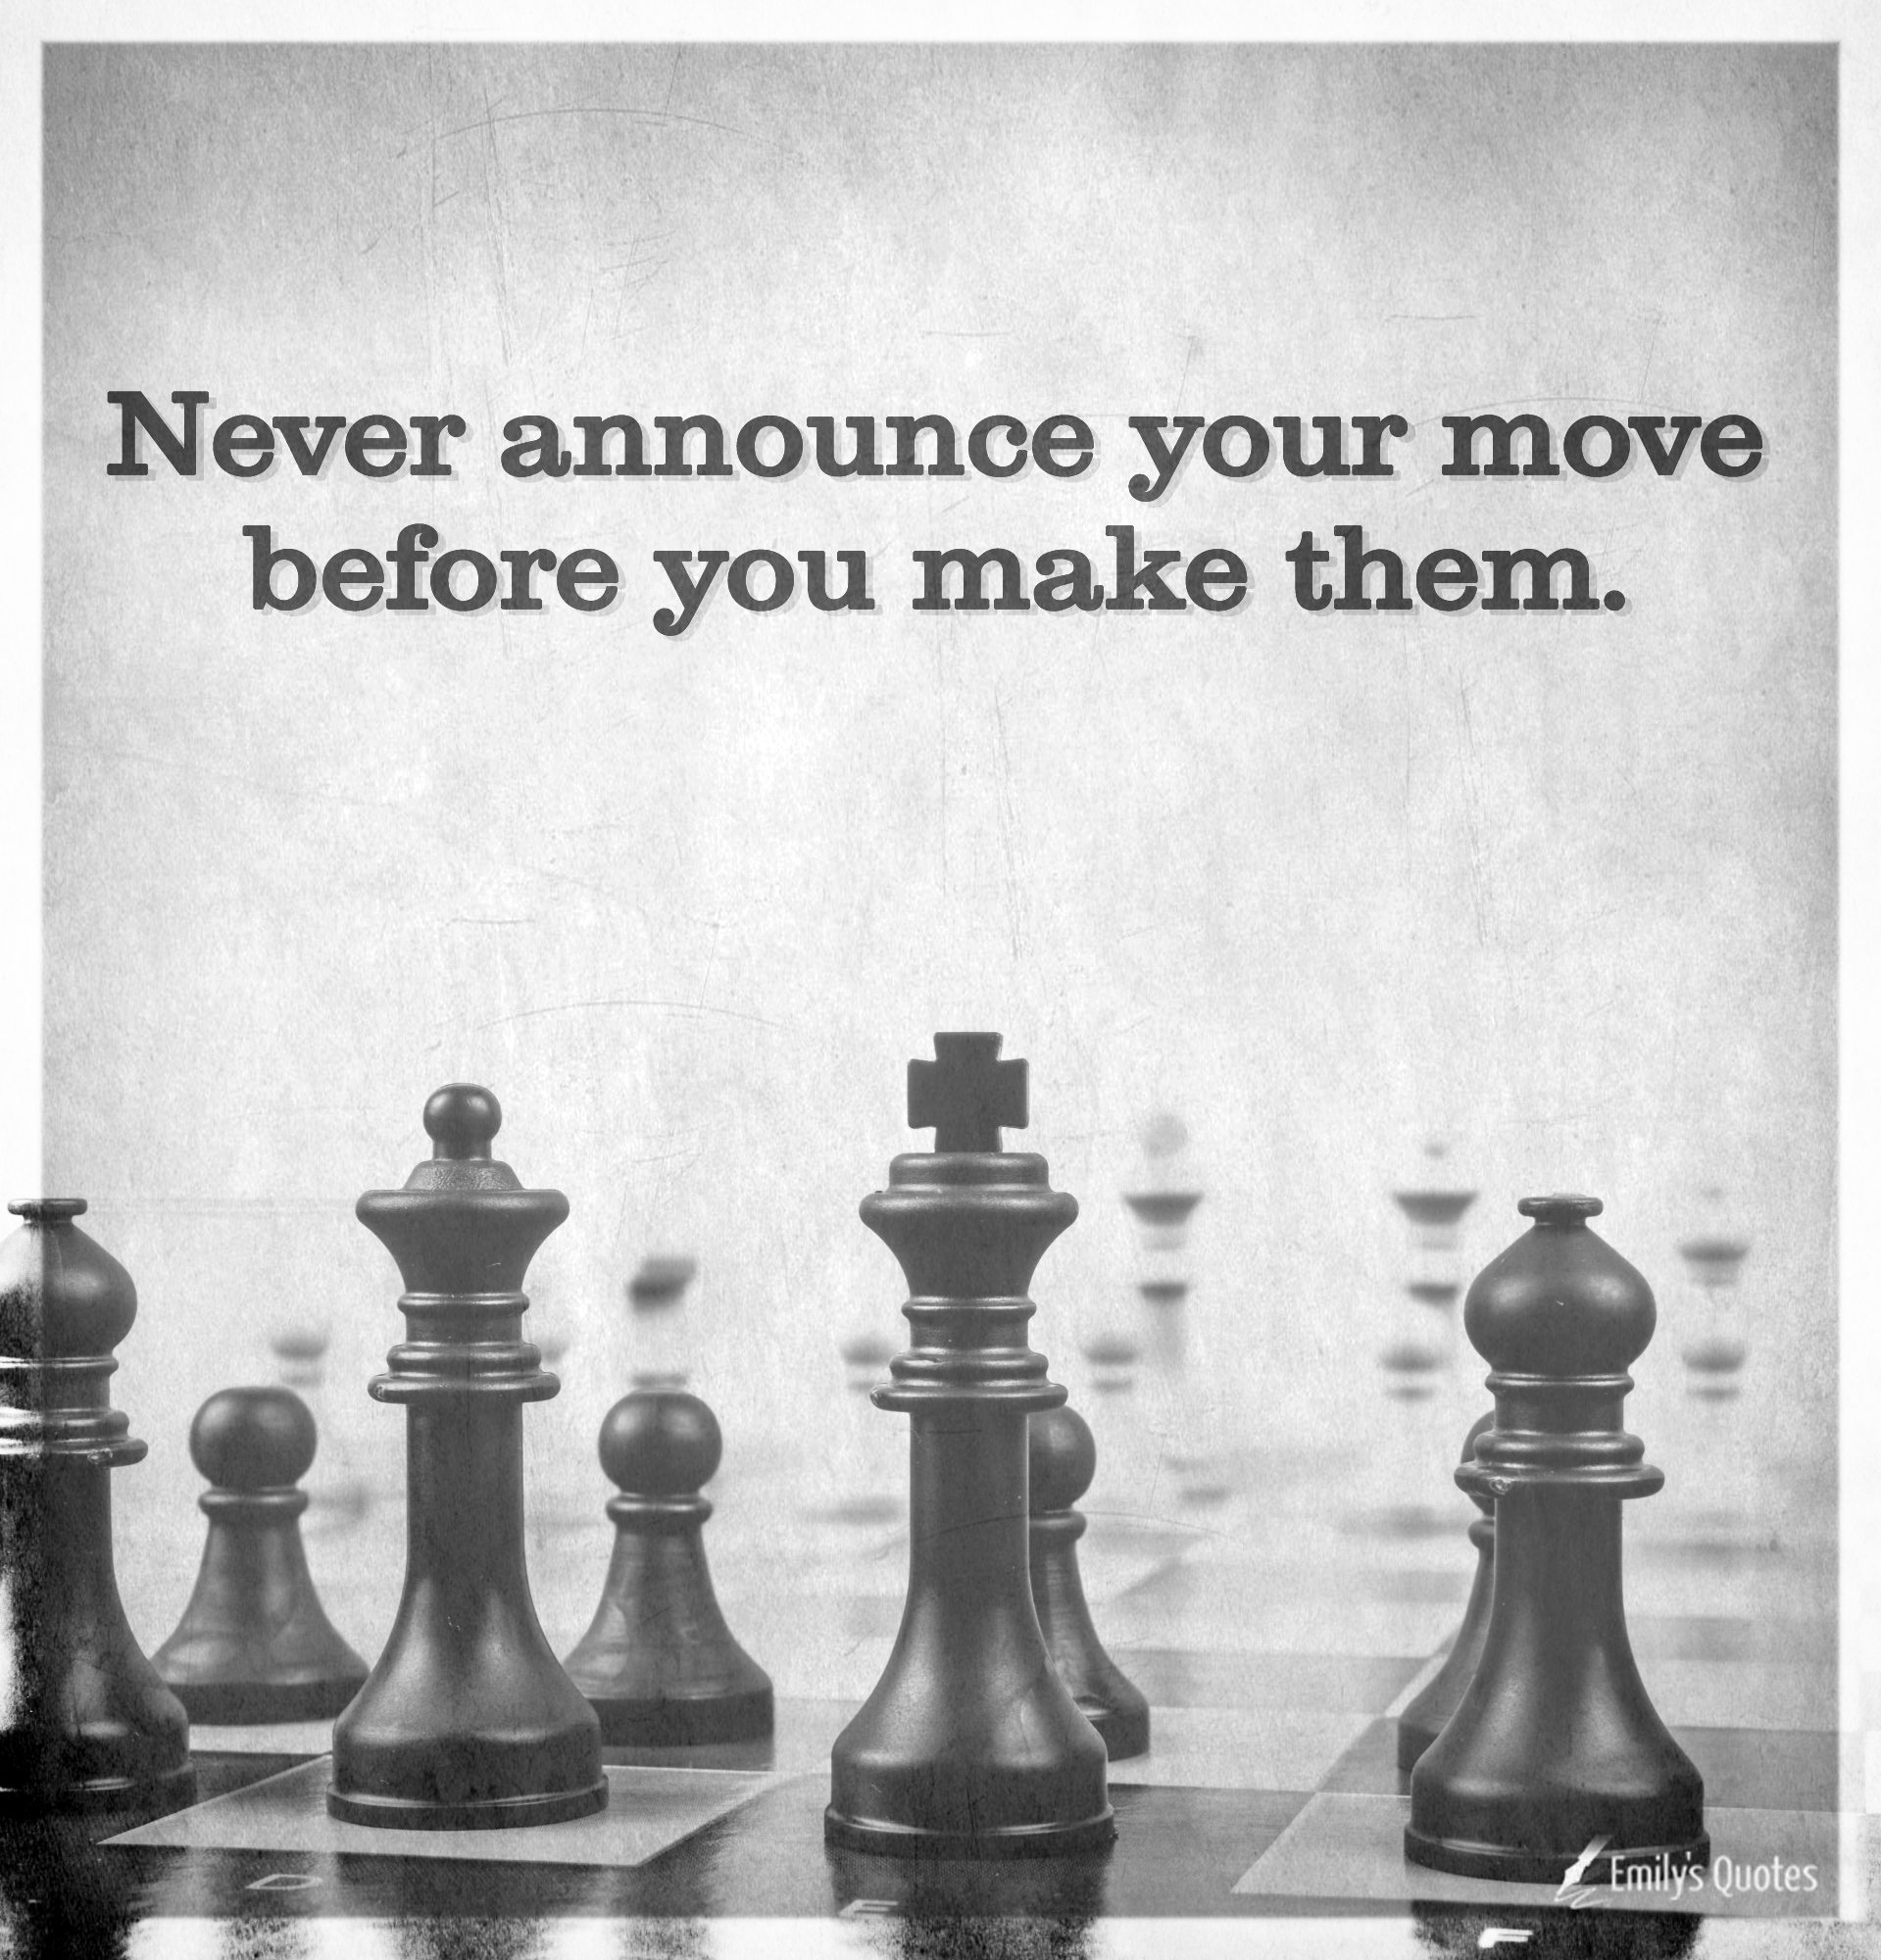 Never announce your move before you make them | Popular inspirational